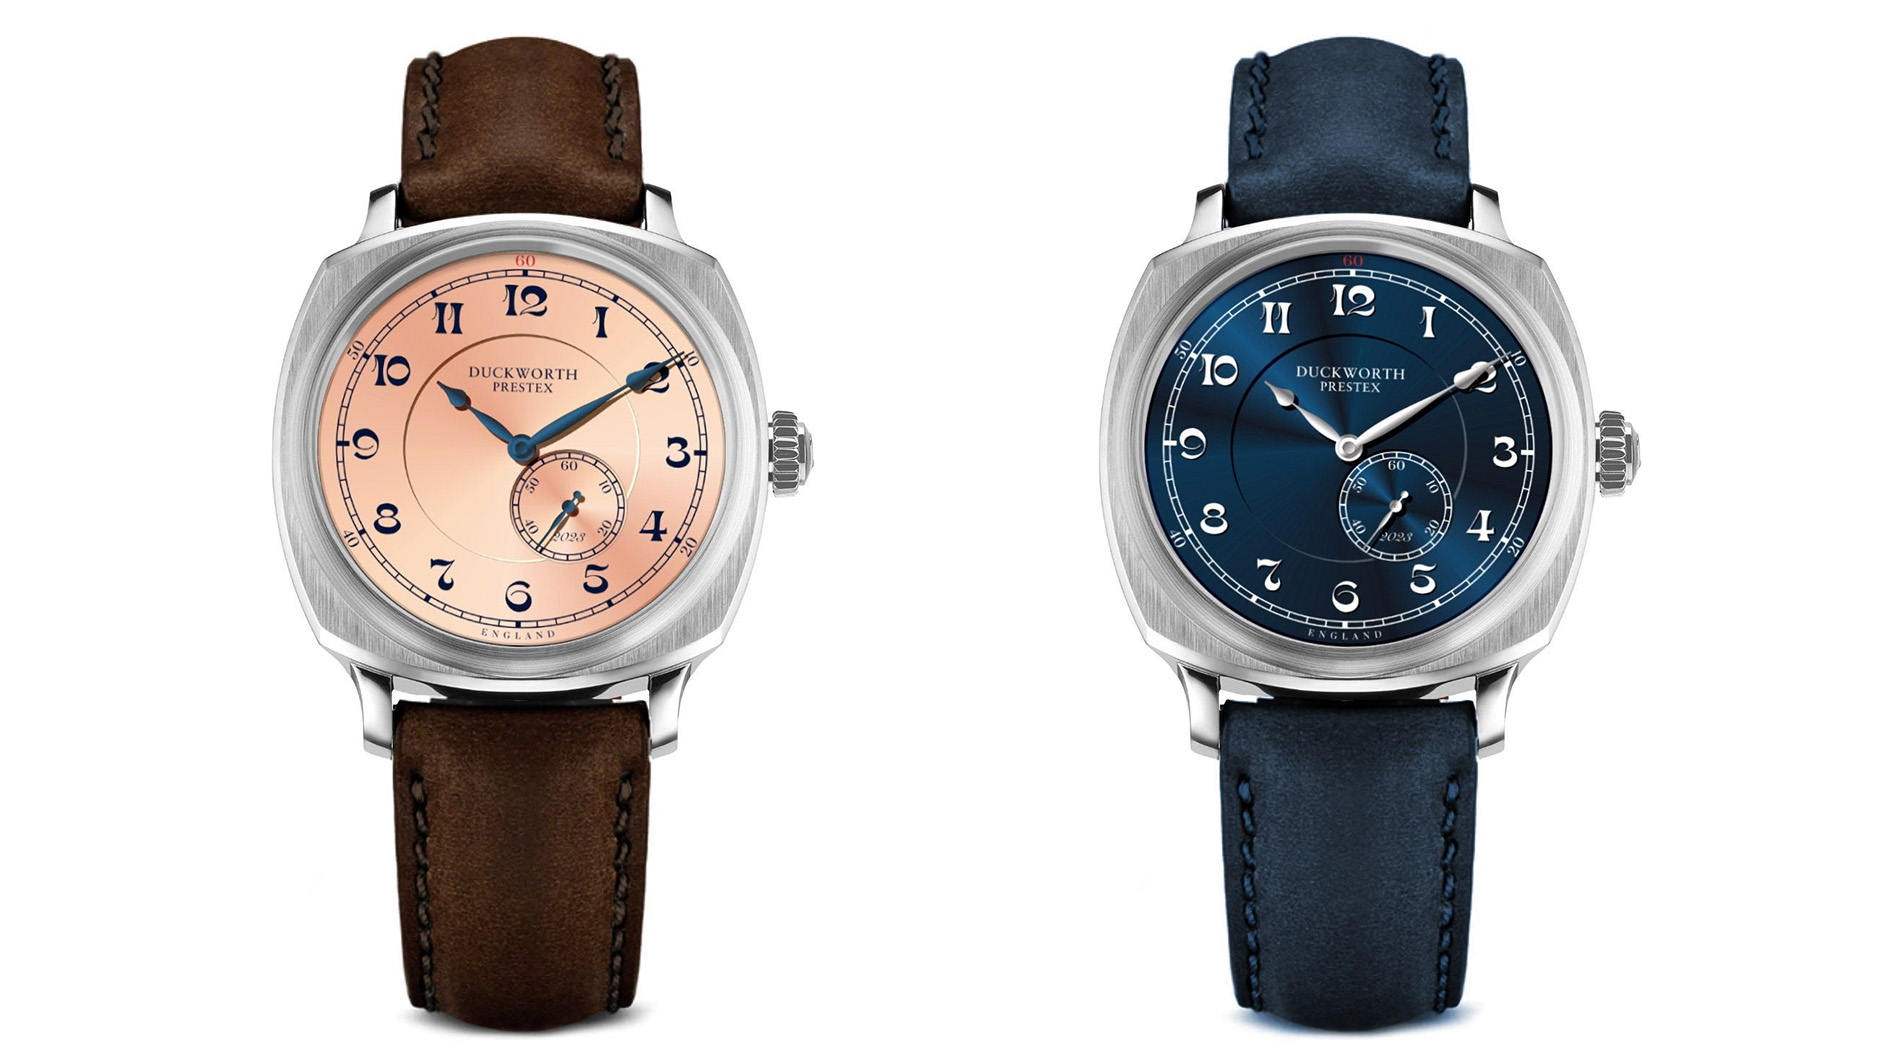 Limited edition Duckworth Prestex watches mark Kings Charles ...